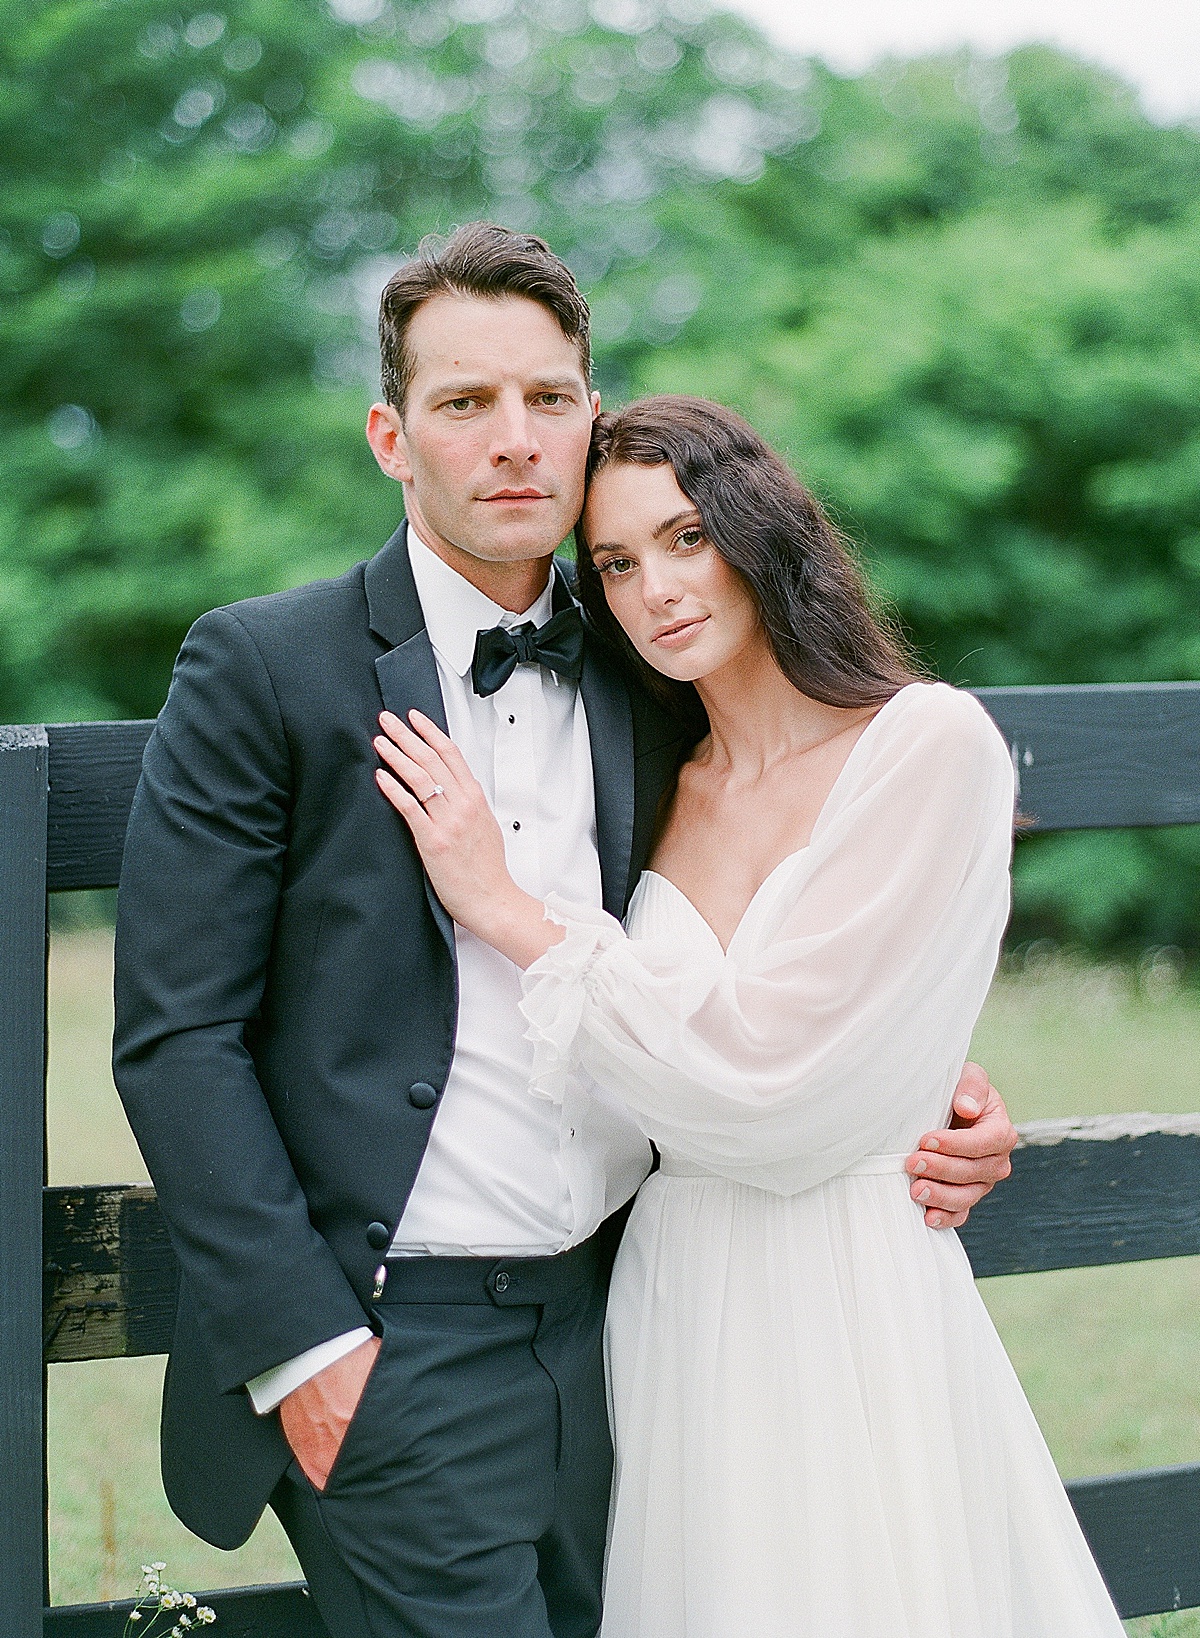 Bride and Groom Leaning against black fence looking at Camera